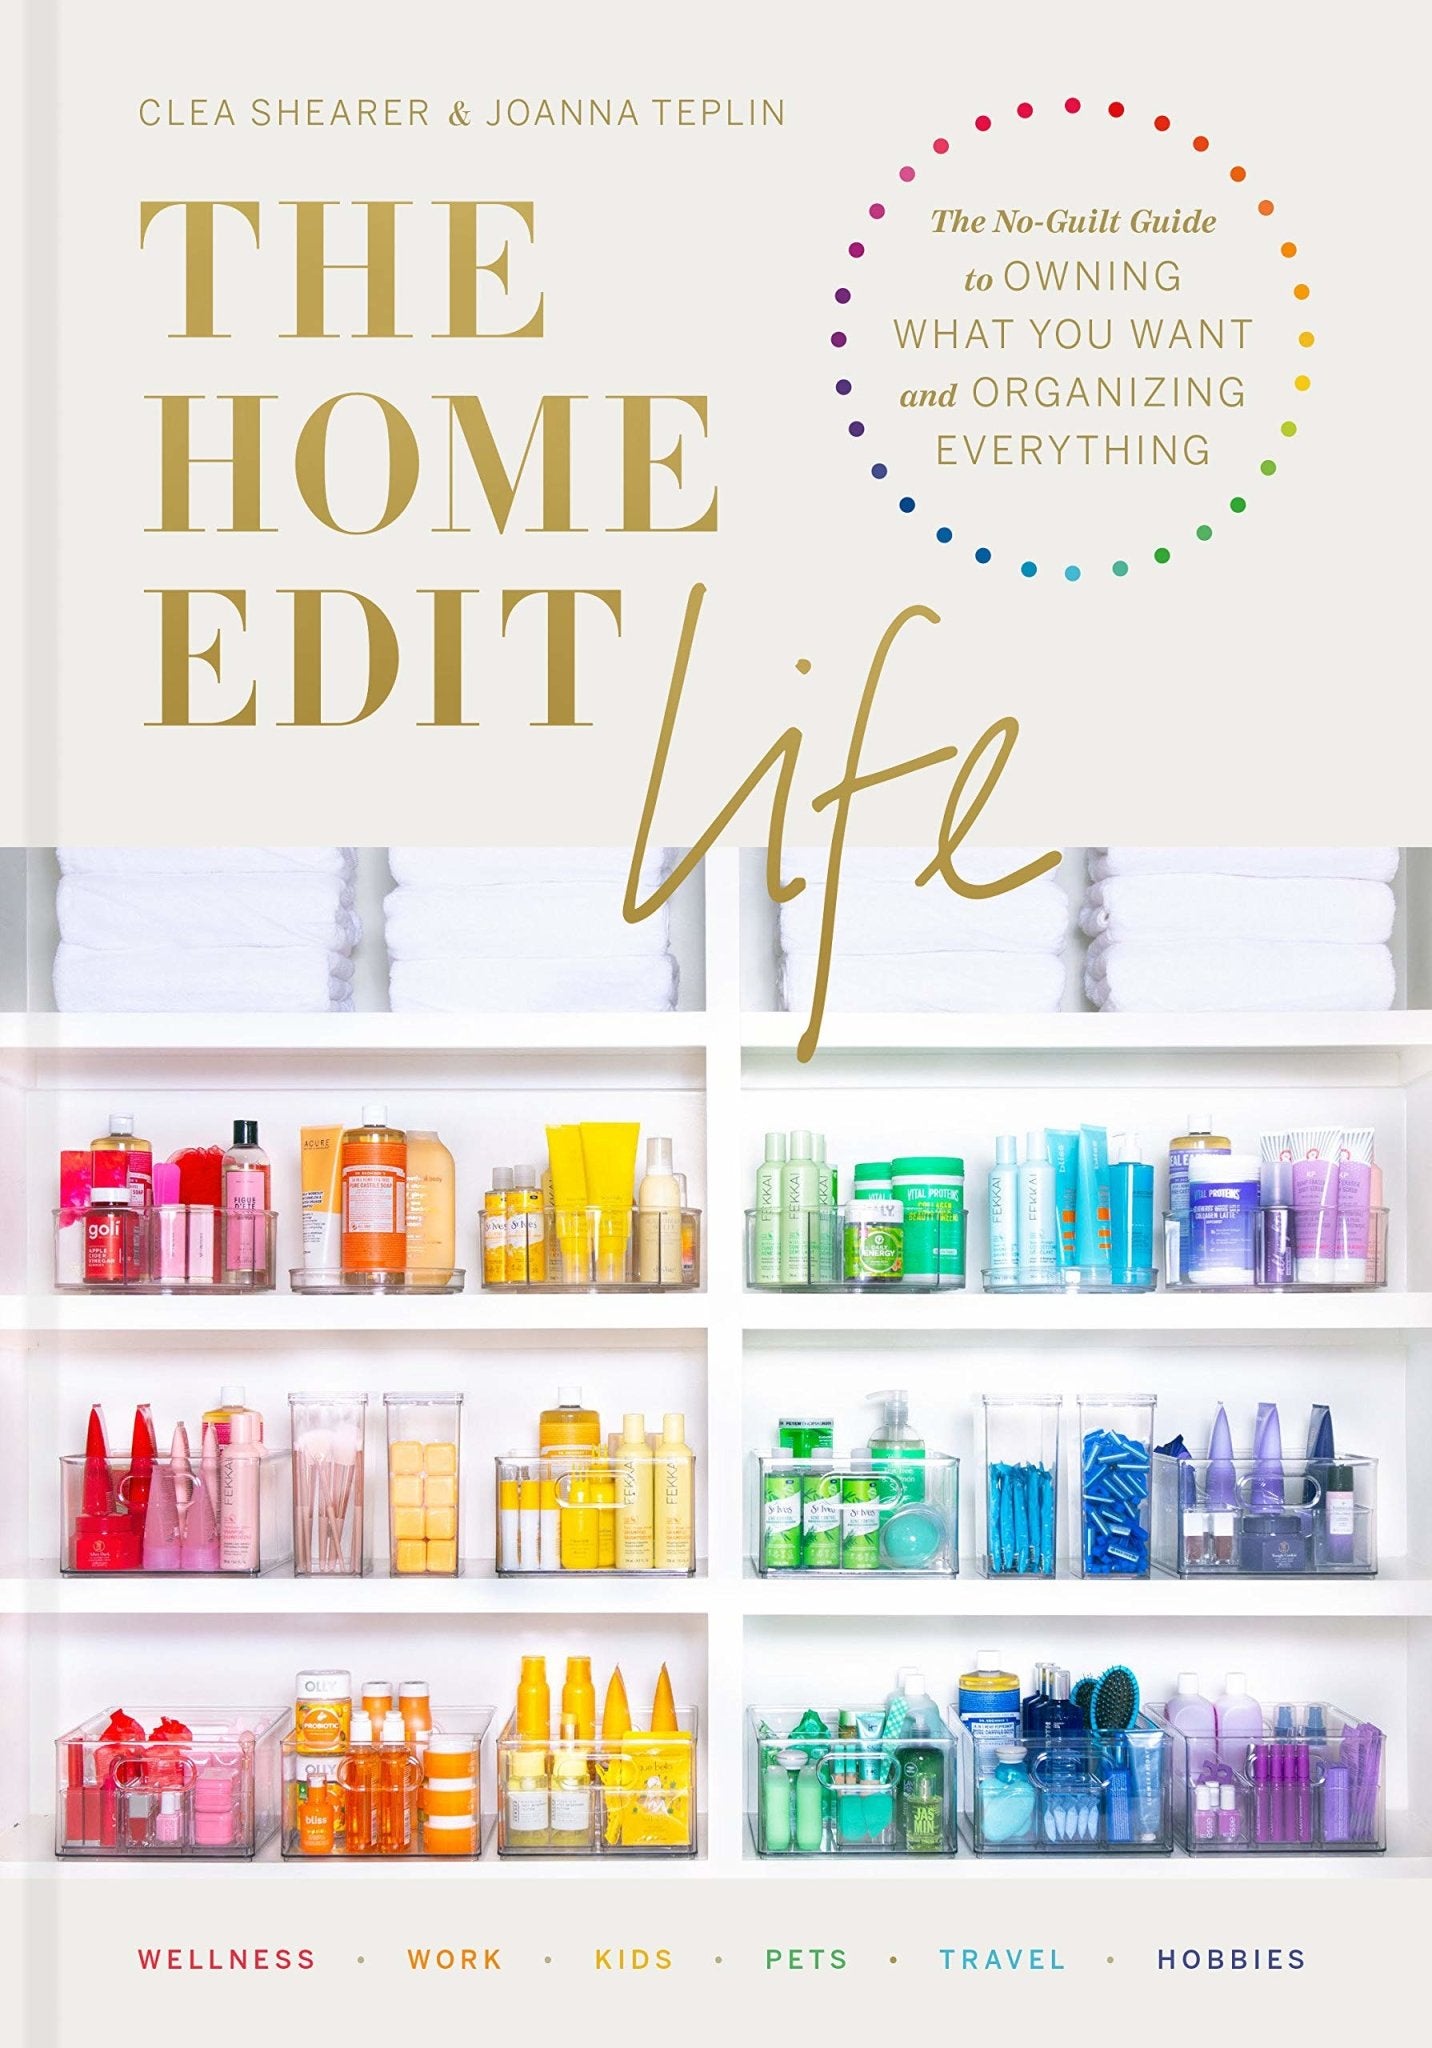 The Home Edit Life: The No-Guilt Guide to Owning What You Want and Organizing Everything by Clea Shearer & Joanna Teplin [Hardcover} - LV'S Global Media